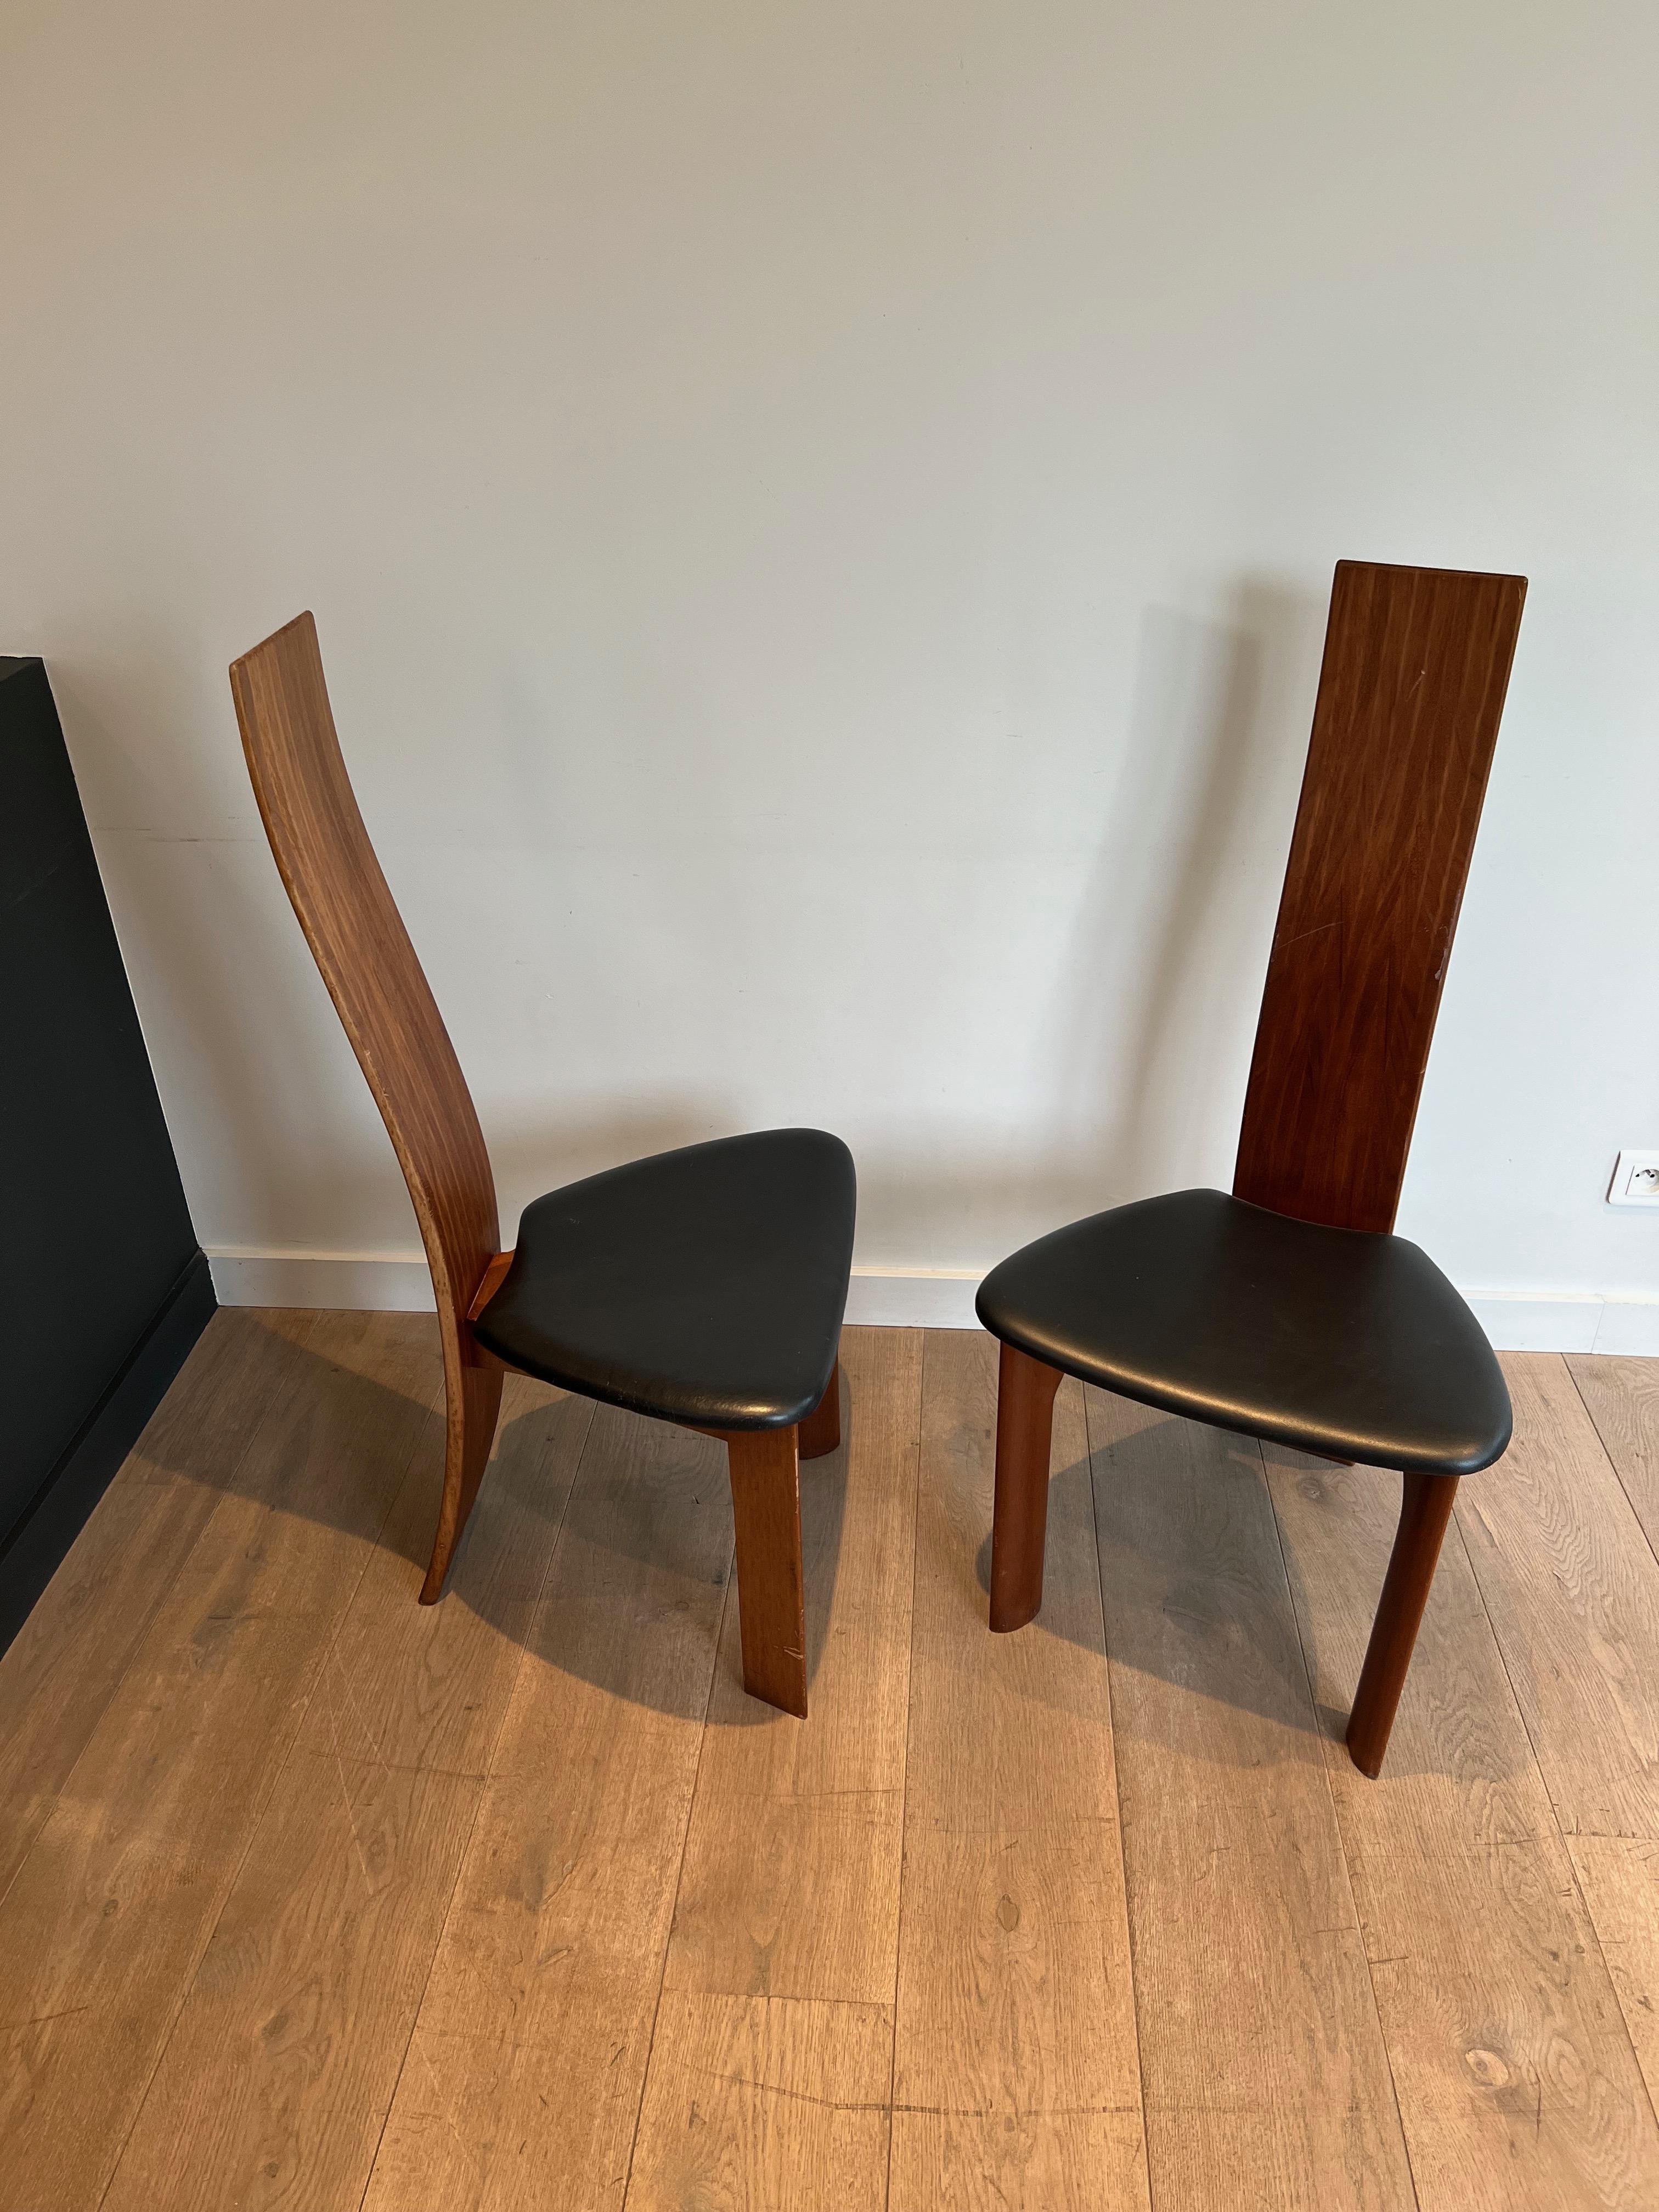 Pair of Exotic Wood and Black Leather Chairs, Scandinavian Work. Circa 1970 For Sale 13